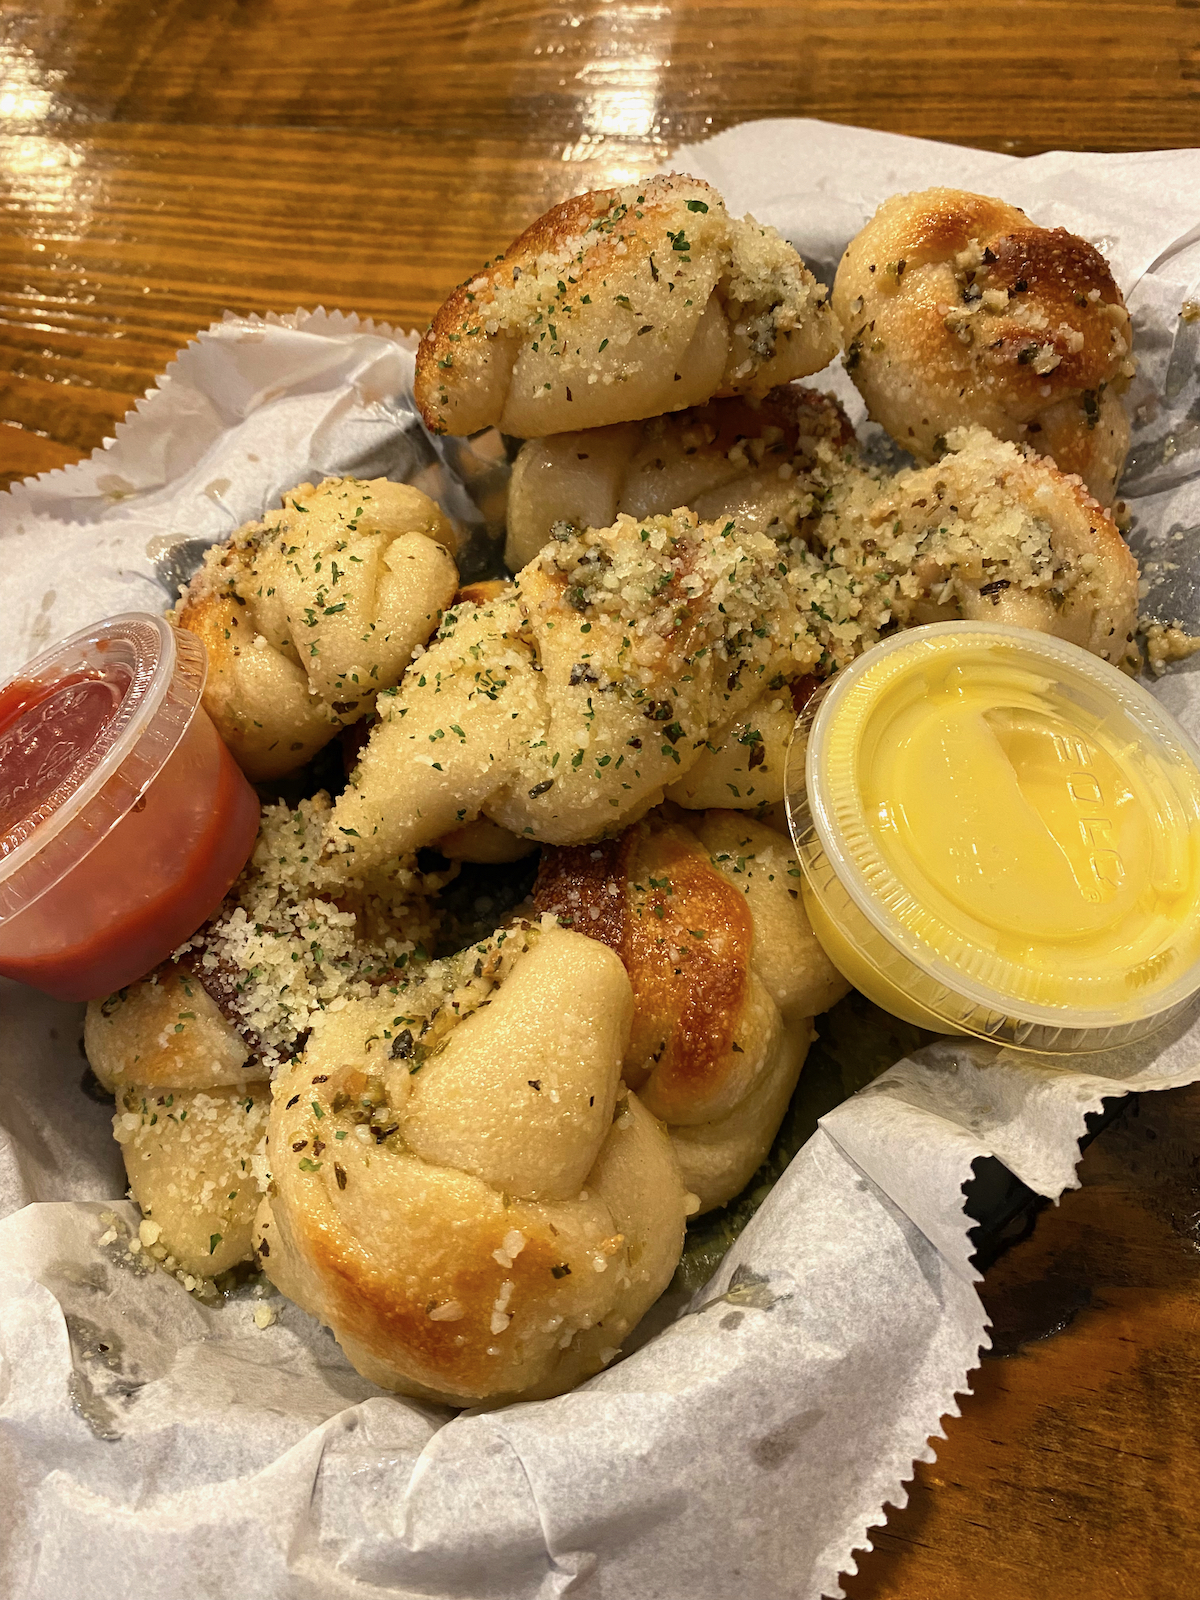 Garlic knots at the Greathouse of Pizza in Casey, Illinois